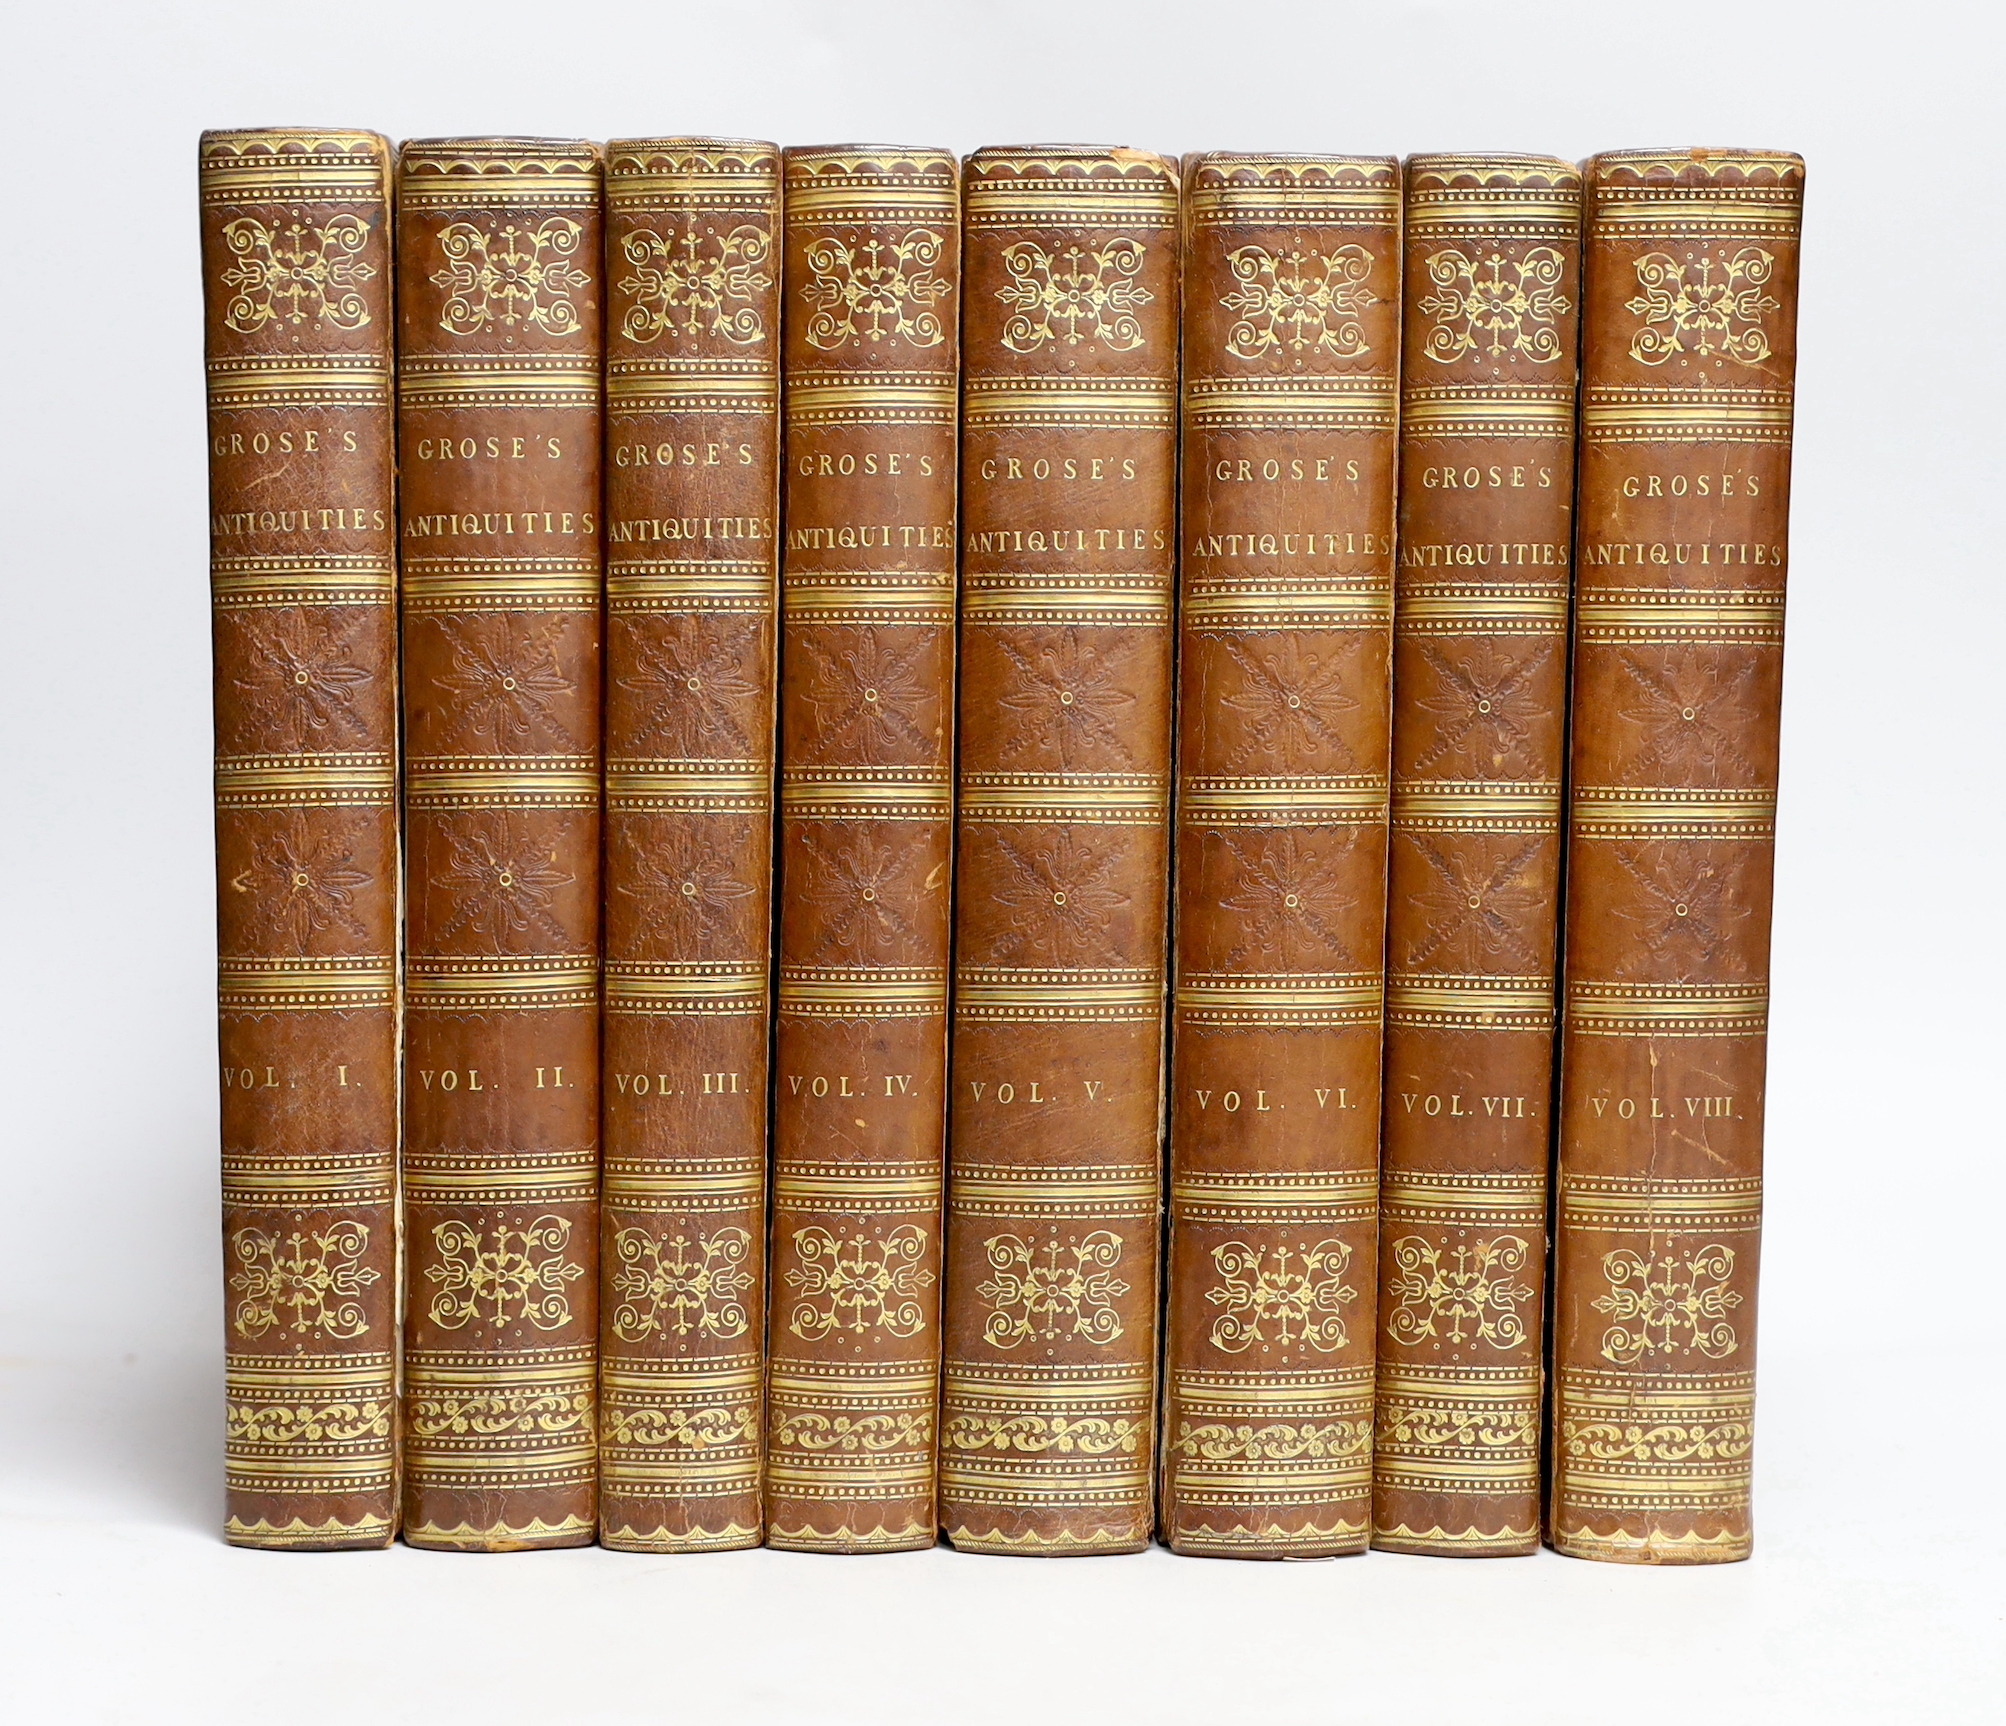 Grose, F - The Antiquities of England and Wales. New edition, 8 vols, 4to, contemporary diced calf, with engraved vignette title to each volume, large folding map of England and Wales, portrait of Grose, 636 (of 639) eng